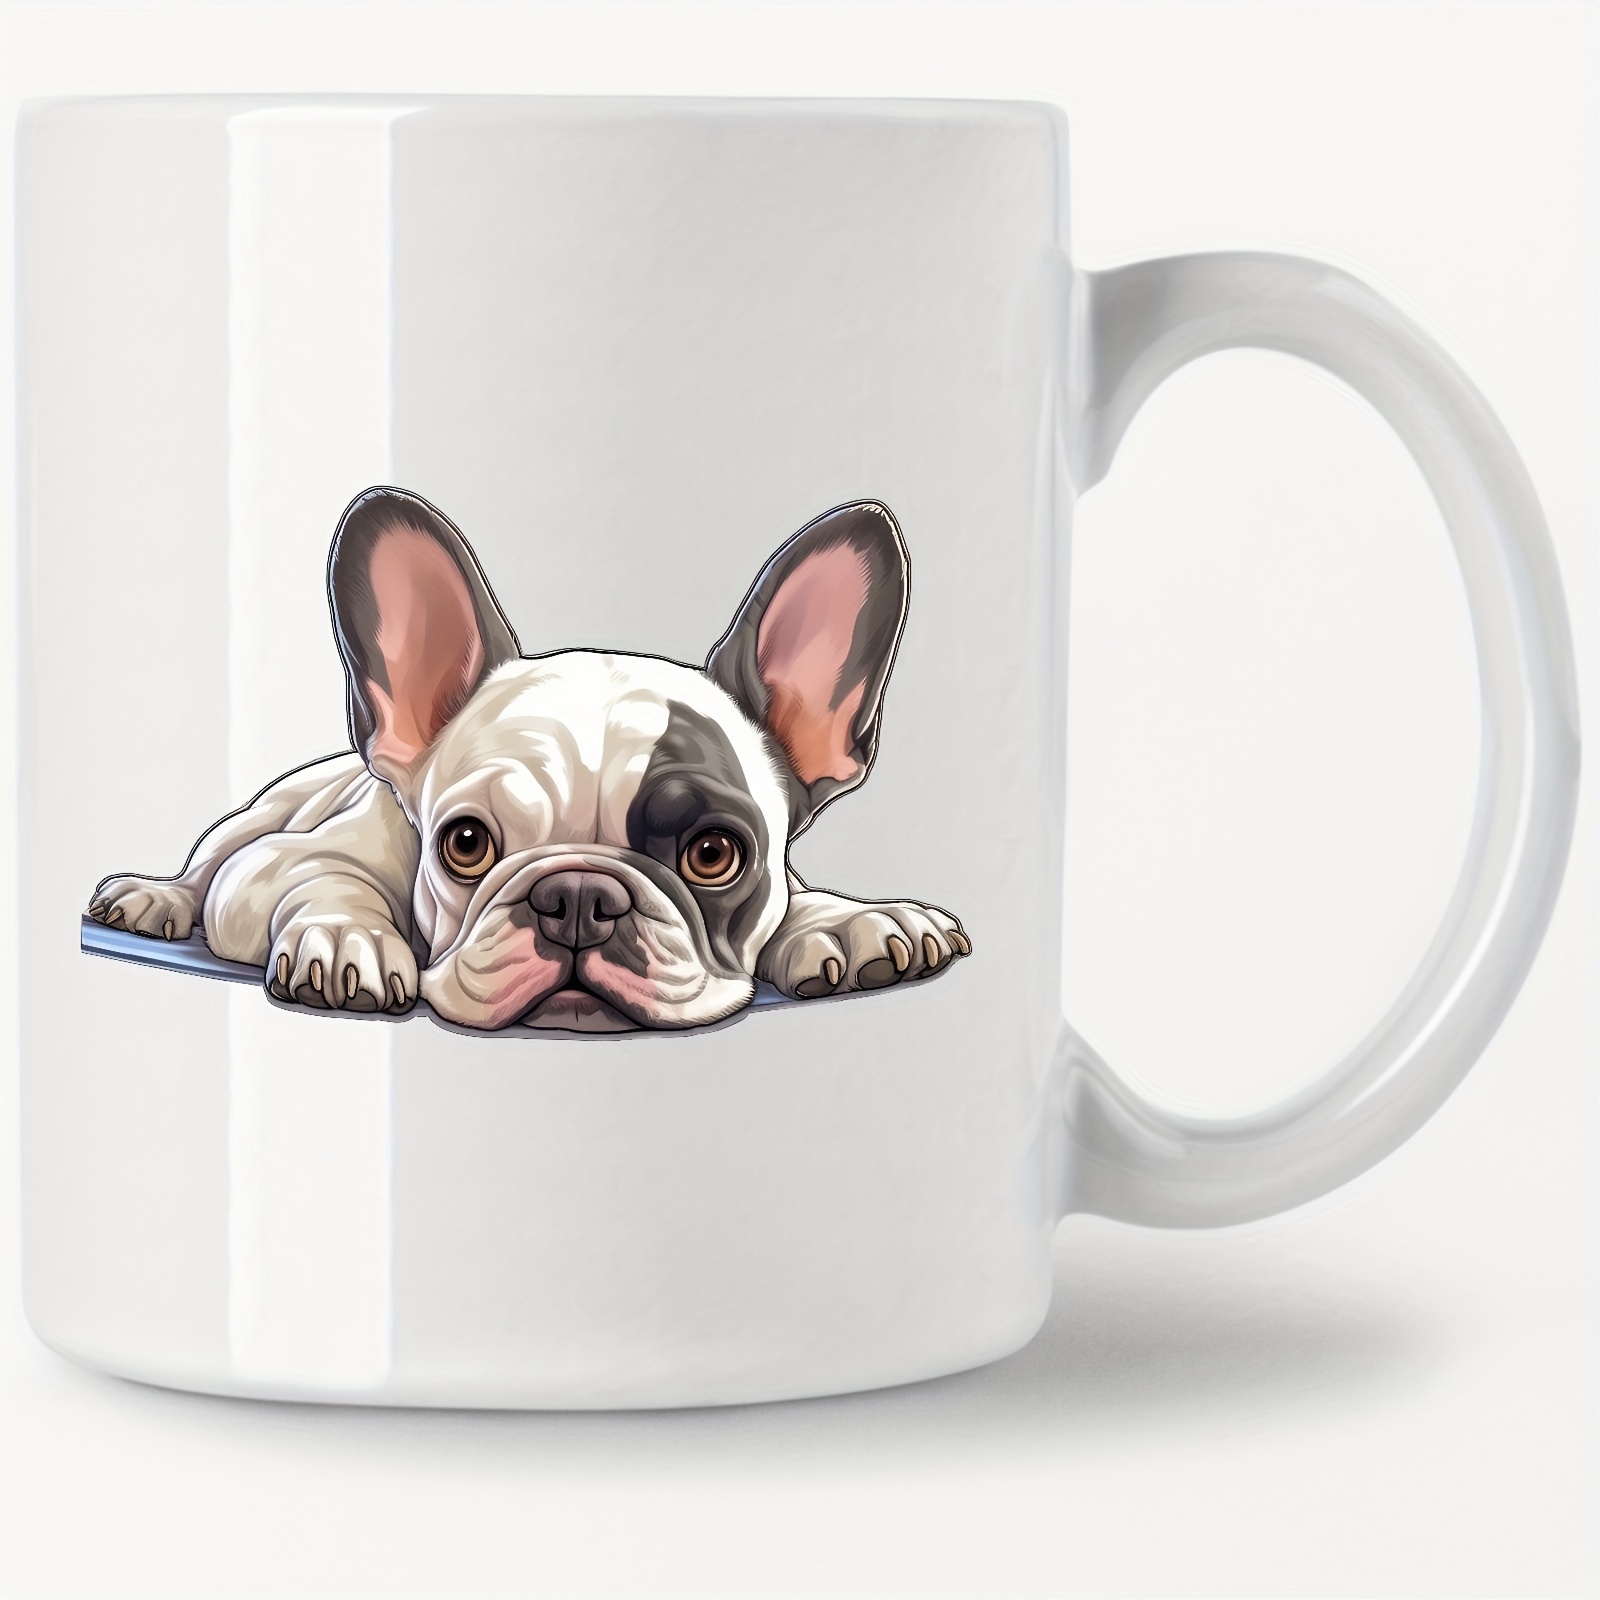 

11oz Ceramic Coffee Mug With French Bulldog Watercolor Design - Dishwasher & Microwave Safe - Ideal Gift For Dog Lovers, Friends, And Family